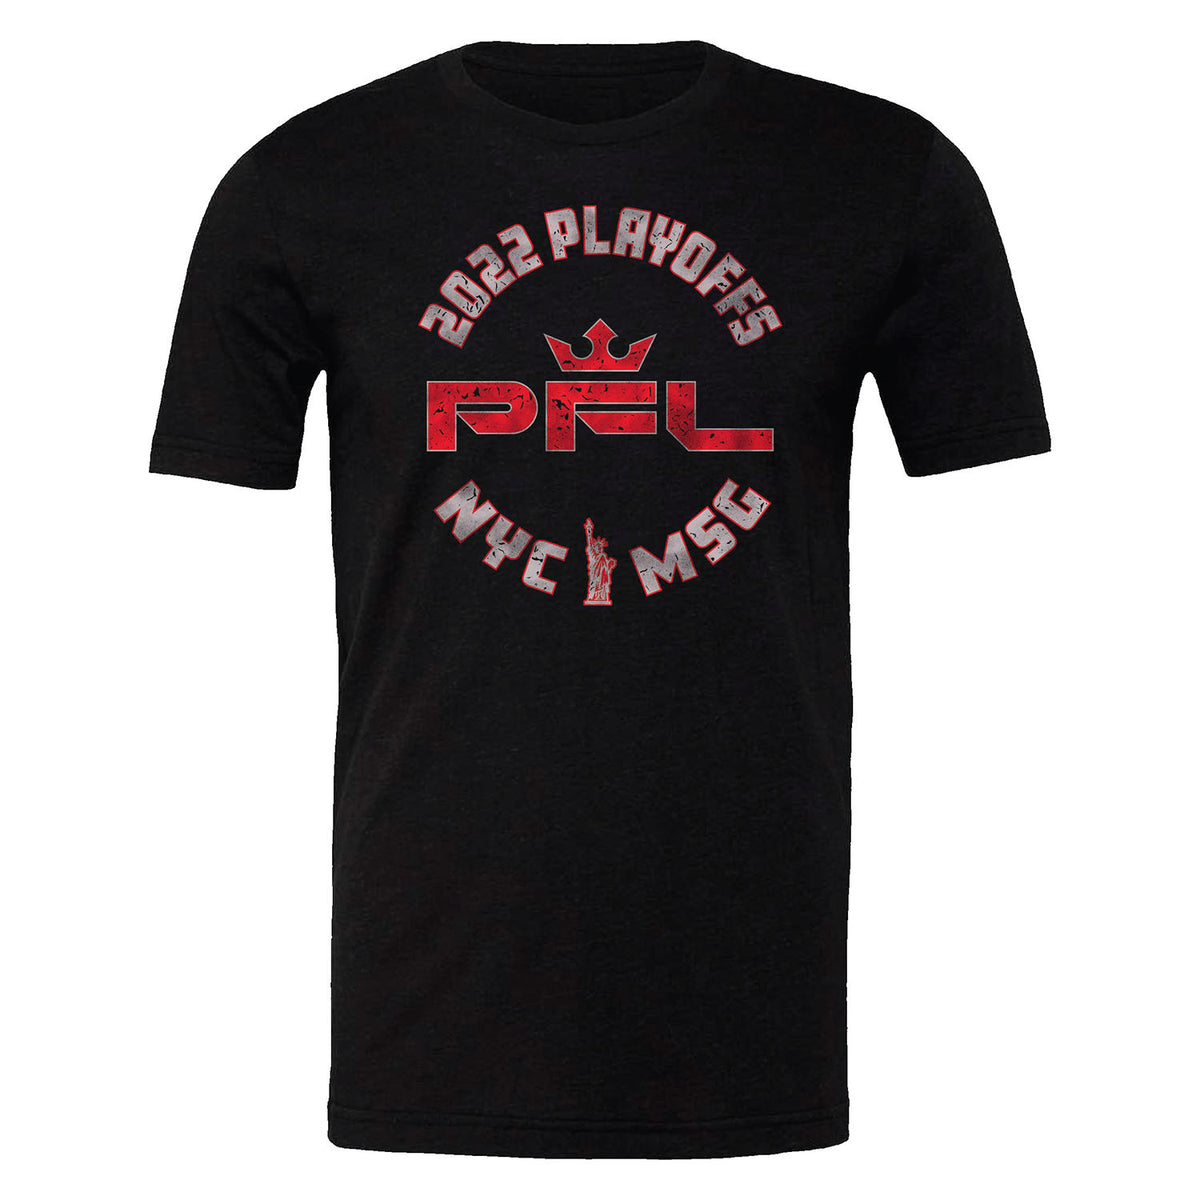 PFL Playoffs T-Shirt - New York City in Black - Front View